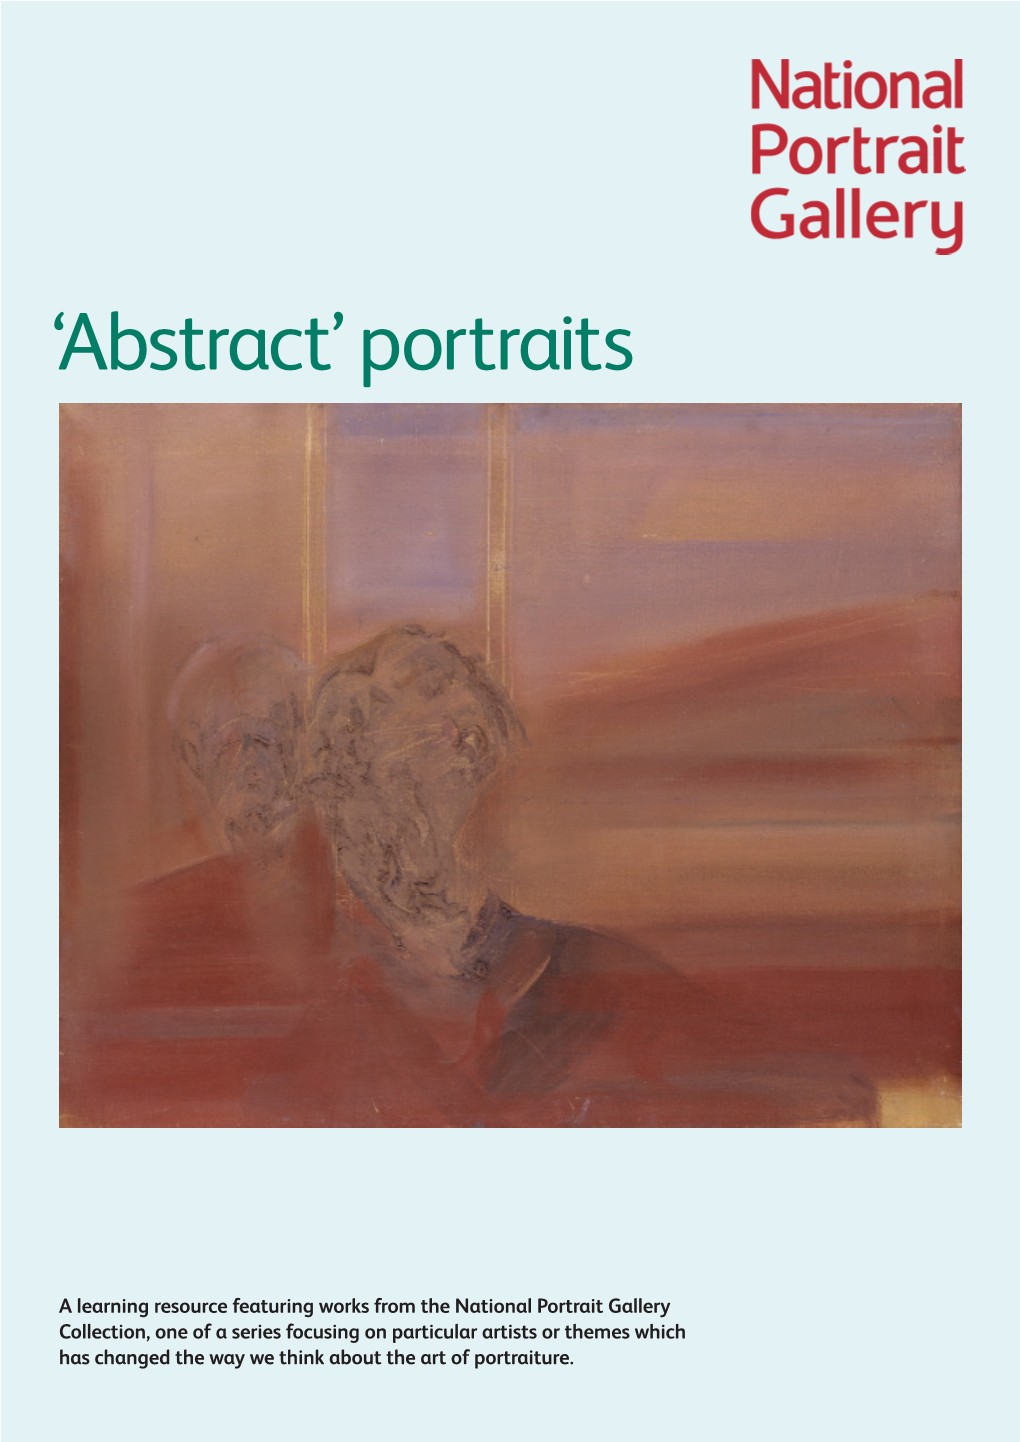 'Abstract' Portraits